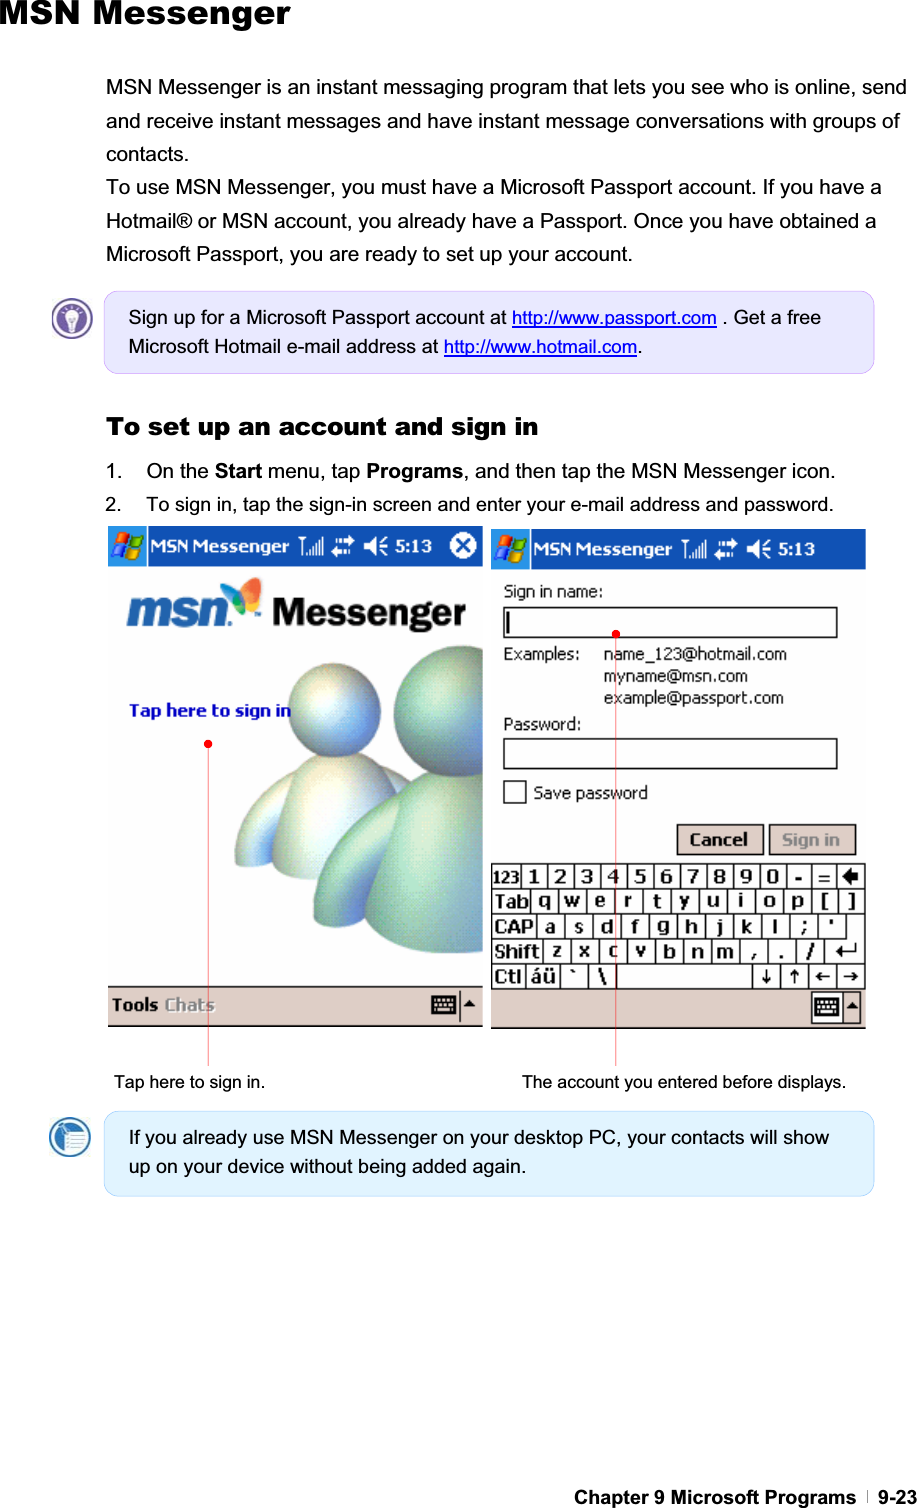 GChapter 9 Microsoft Programs   9-23 MSN Messenger MSN Messenger is an instant messaging program that lets you see who is online, send and receive instant messages and have instant message conversations with groups of contacts. To use MSN Messenger, you must have a Microsoft Passport account. If you have a Hotmail® or MSN account, you already have a Passport. Once you have obtained a Microsoft Passport, you are ready to set up your account. To set up an account and sign in 1. On the Start menu, tap Programs, and then tap the MSN Messenger icon. 2.  To sign in, tap the sign-in screen and enter your e-mail address and password.   Tap here to sign in.  The account you entered before displays. Sign up for a Microsoft Passport account at http://www.passport.com . Get a free Microsoft Hotmail e-mail address at http://www.hotmail.com.If you already use MSN Messenger on your desktop PC, your contacts will show up on your device without being added again. 